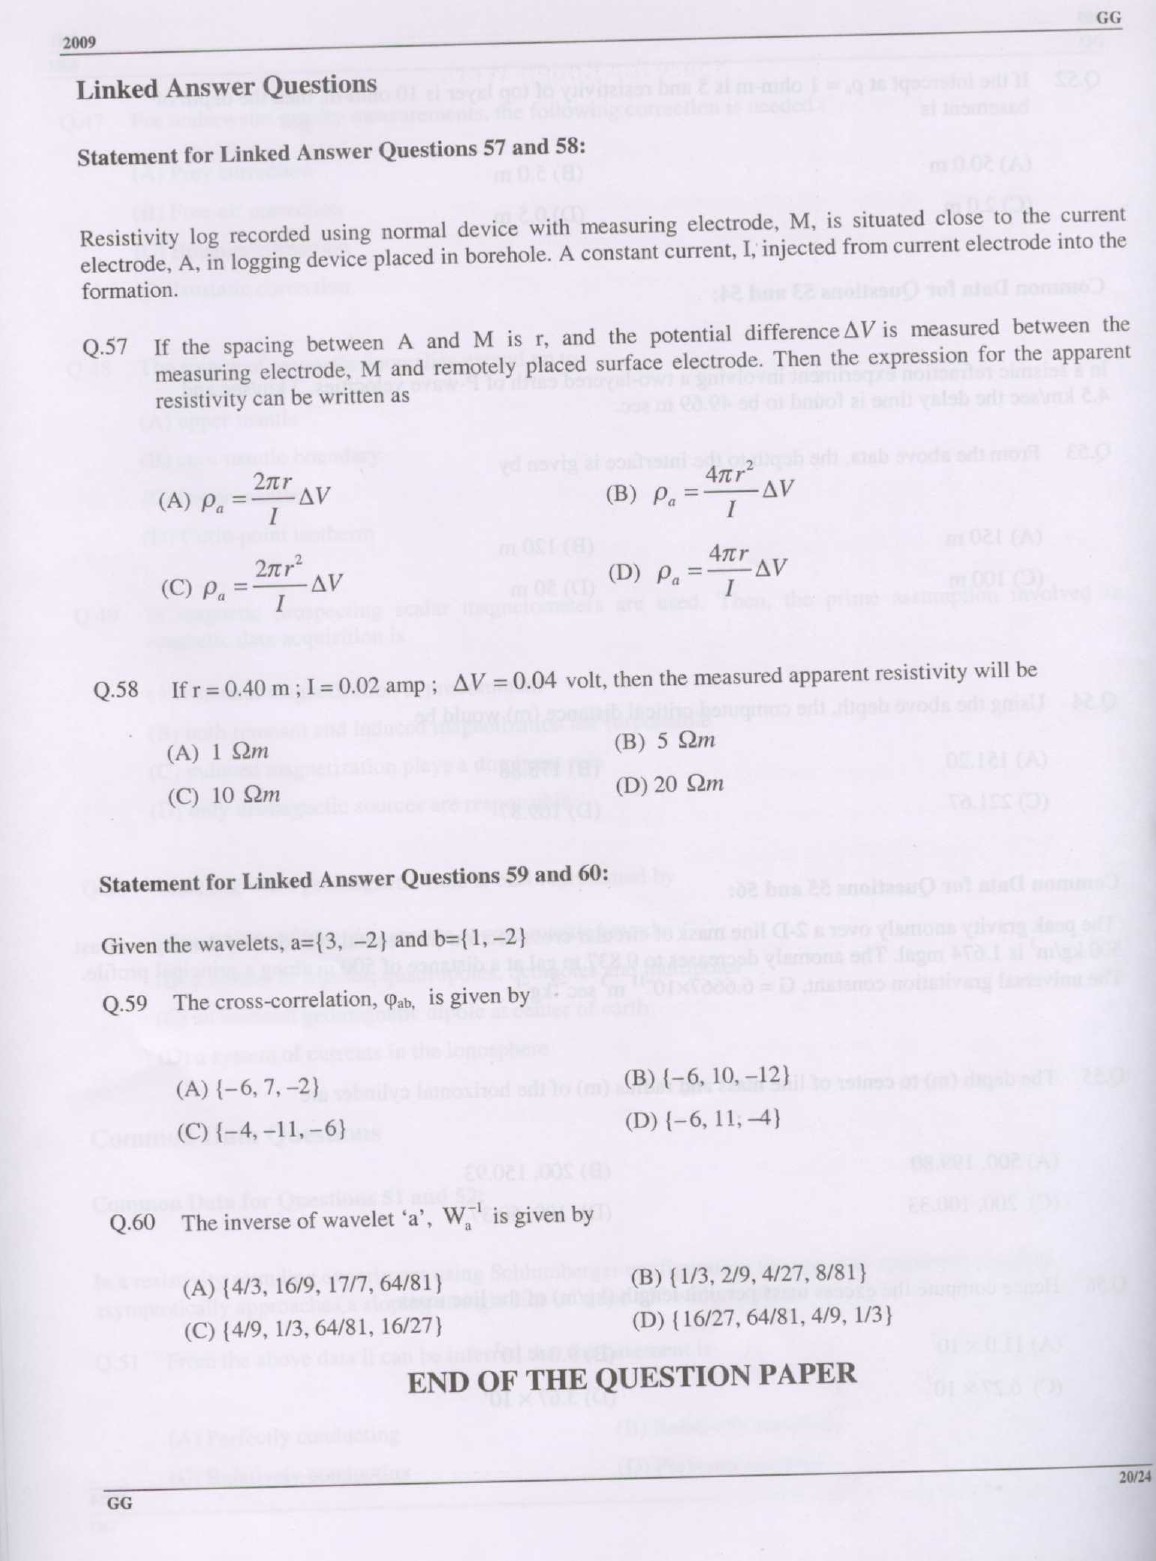 GATE Exam Question Paper 2009 Geology and Geophysics 20